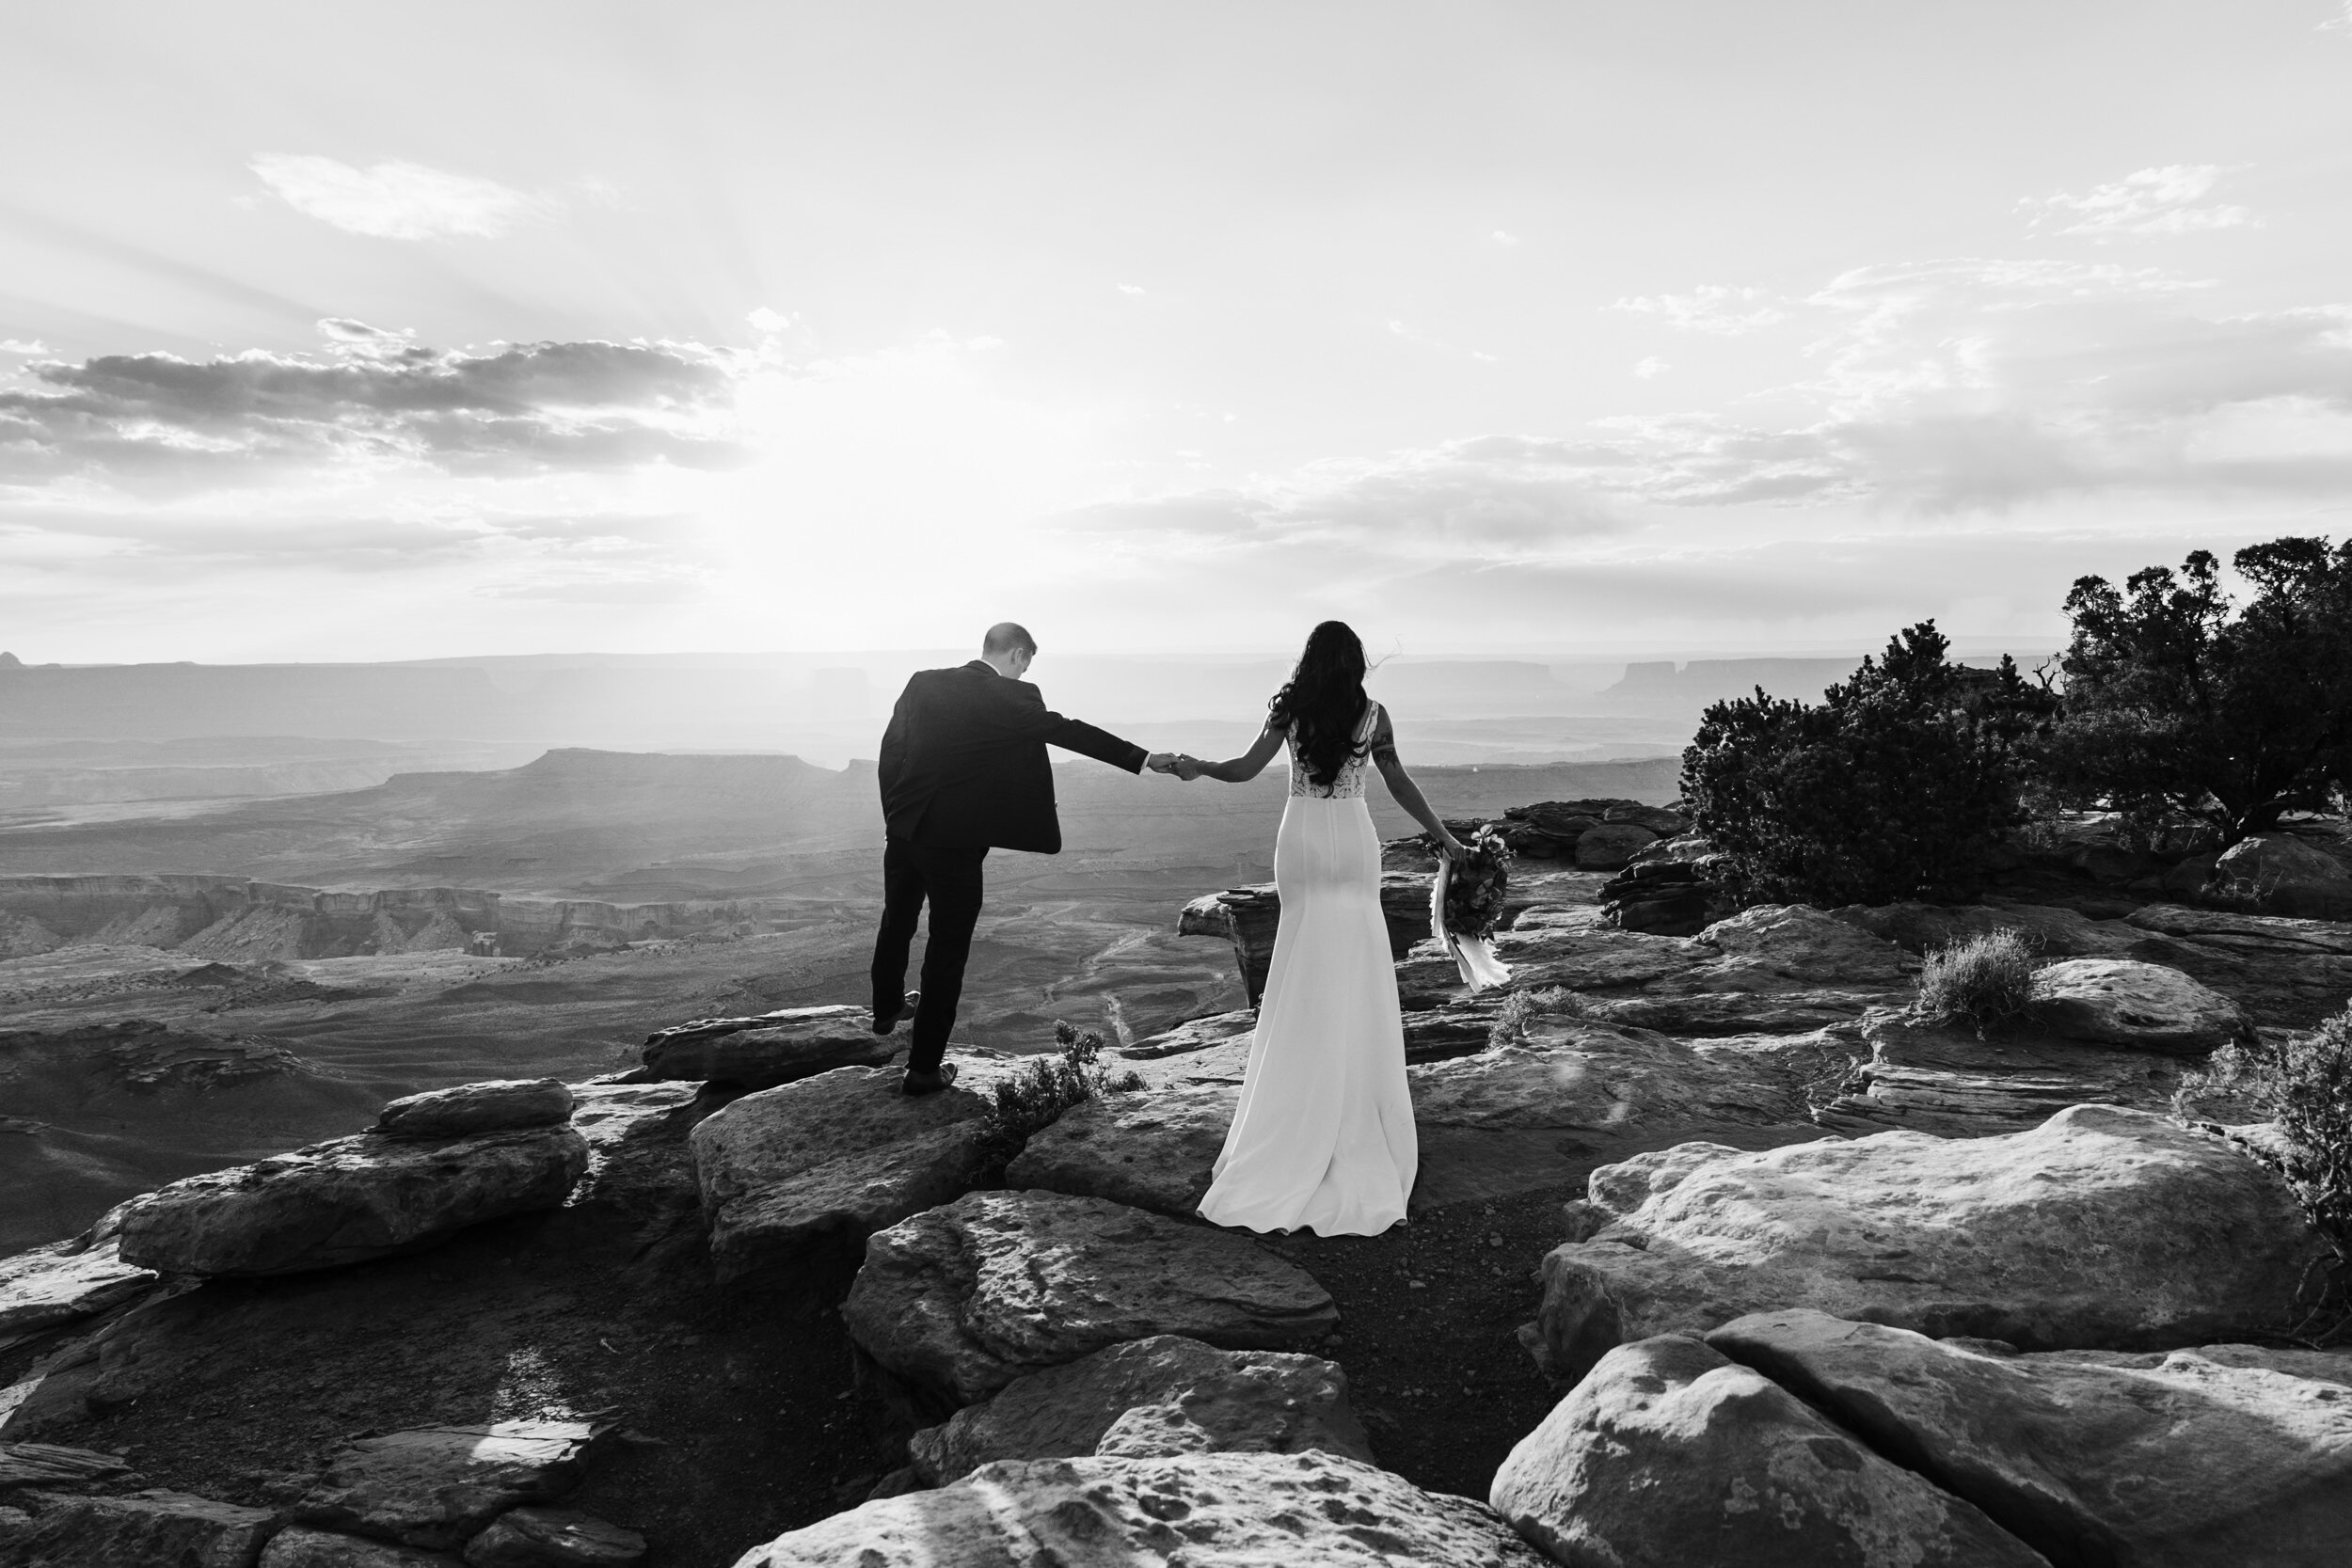 sunset elopement ceremony in canyonlands national park | moab adventure wedding | the hearnes photography